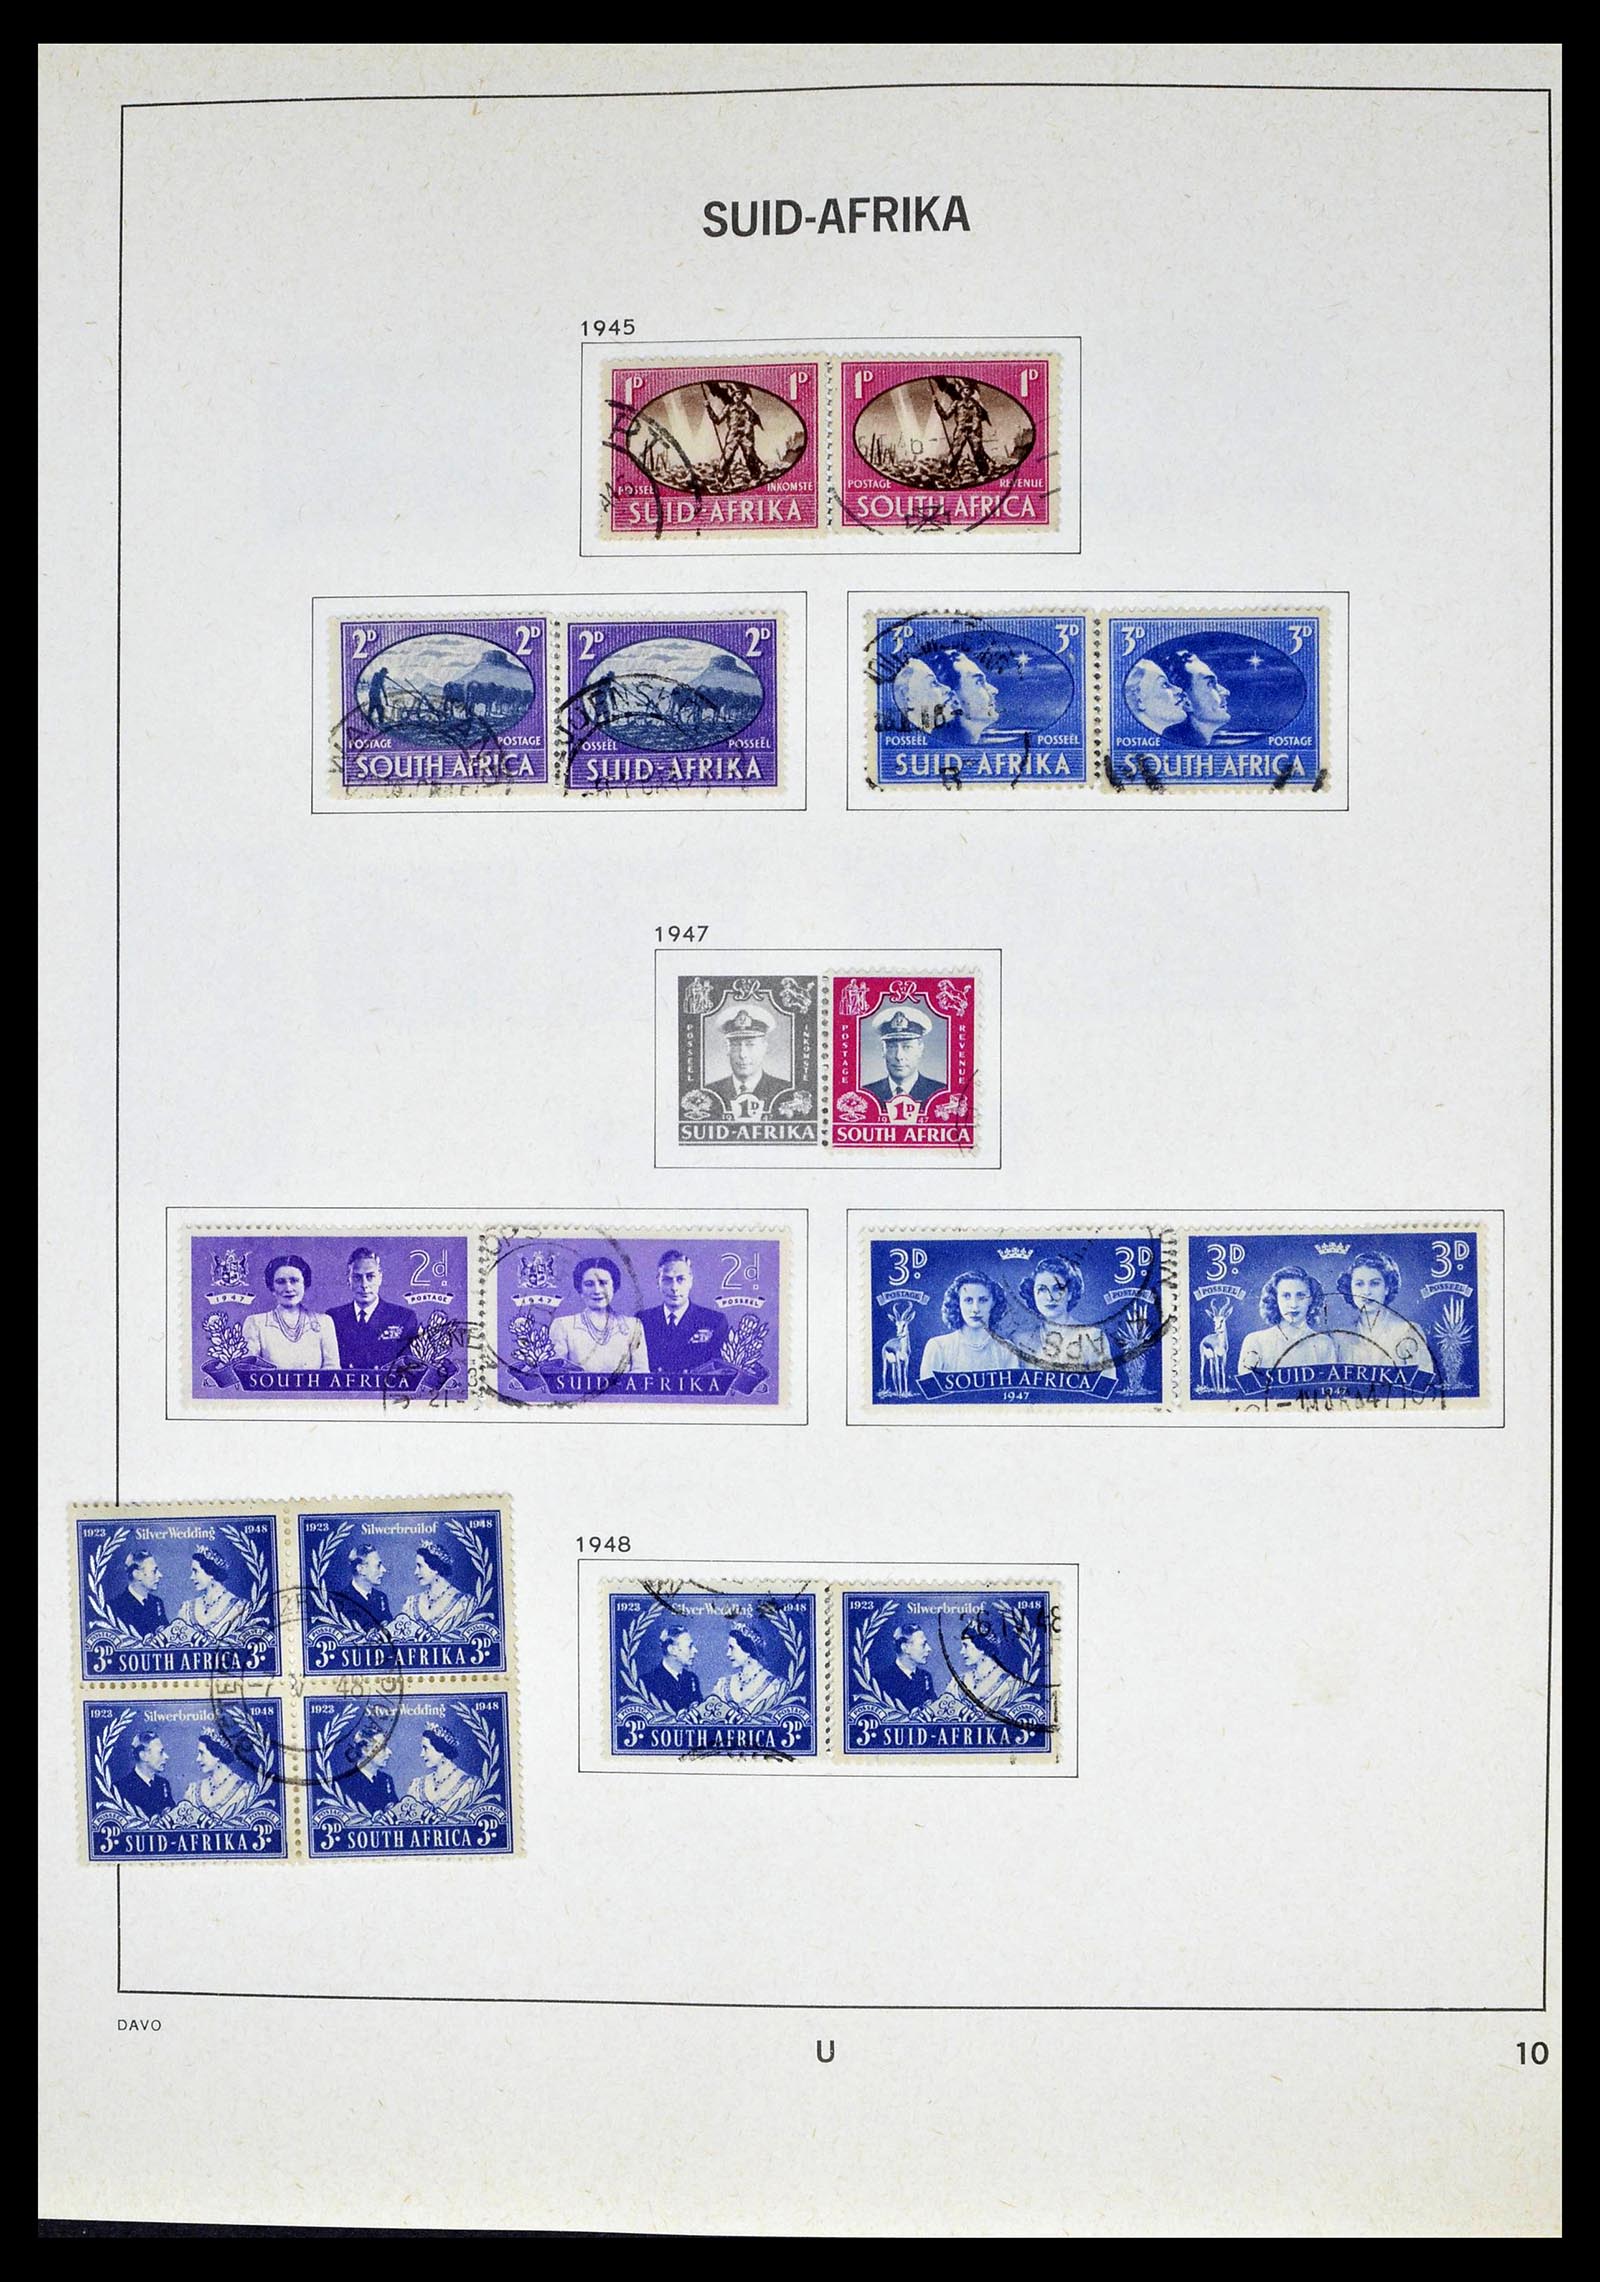 39327 0010 - Stamp collection 39327 South Africa 1910-1998.